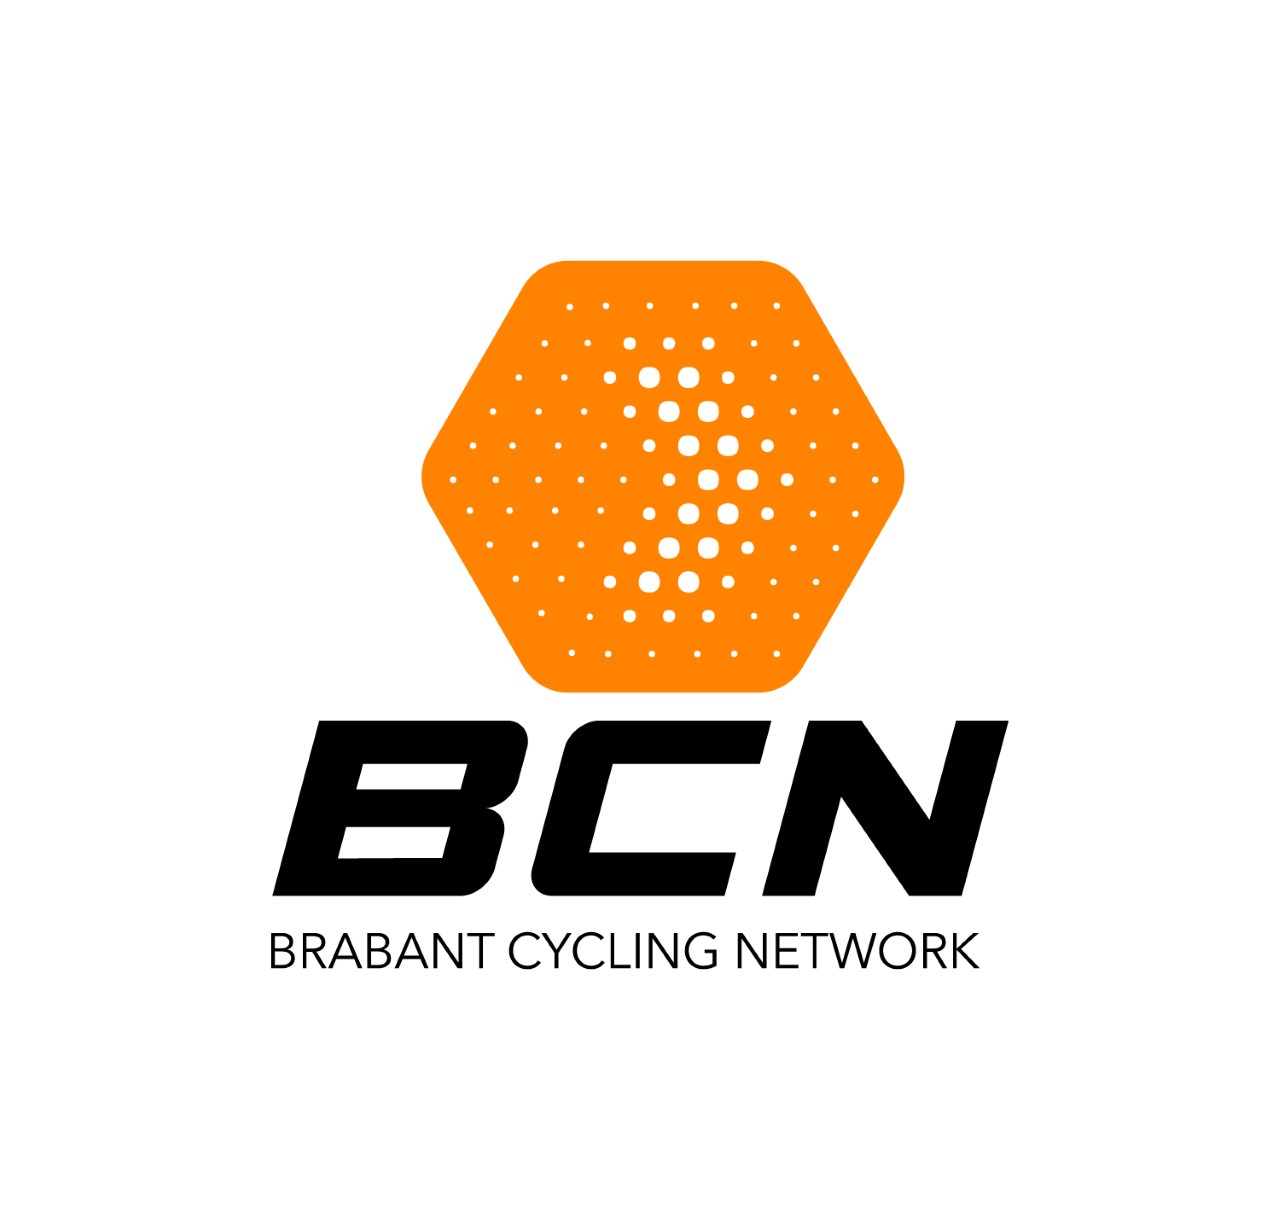 brabant cycling network